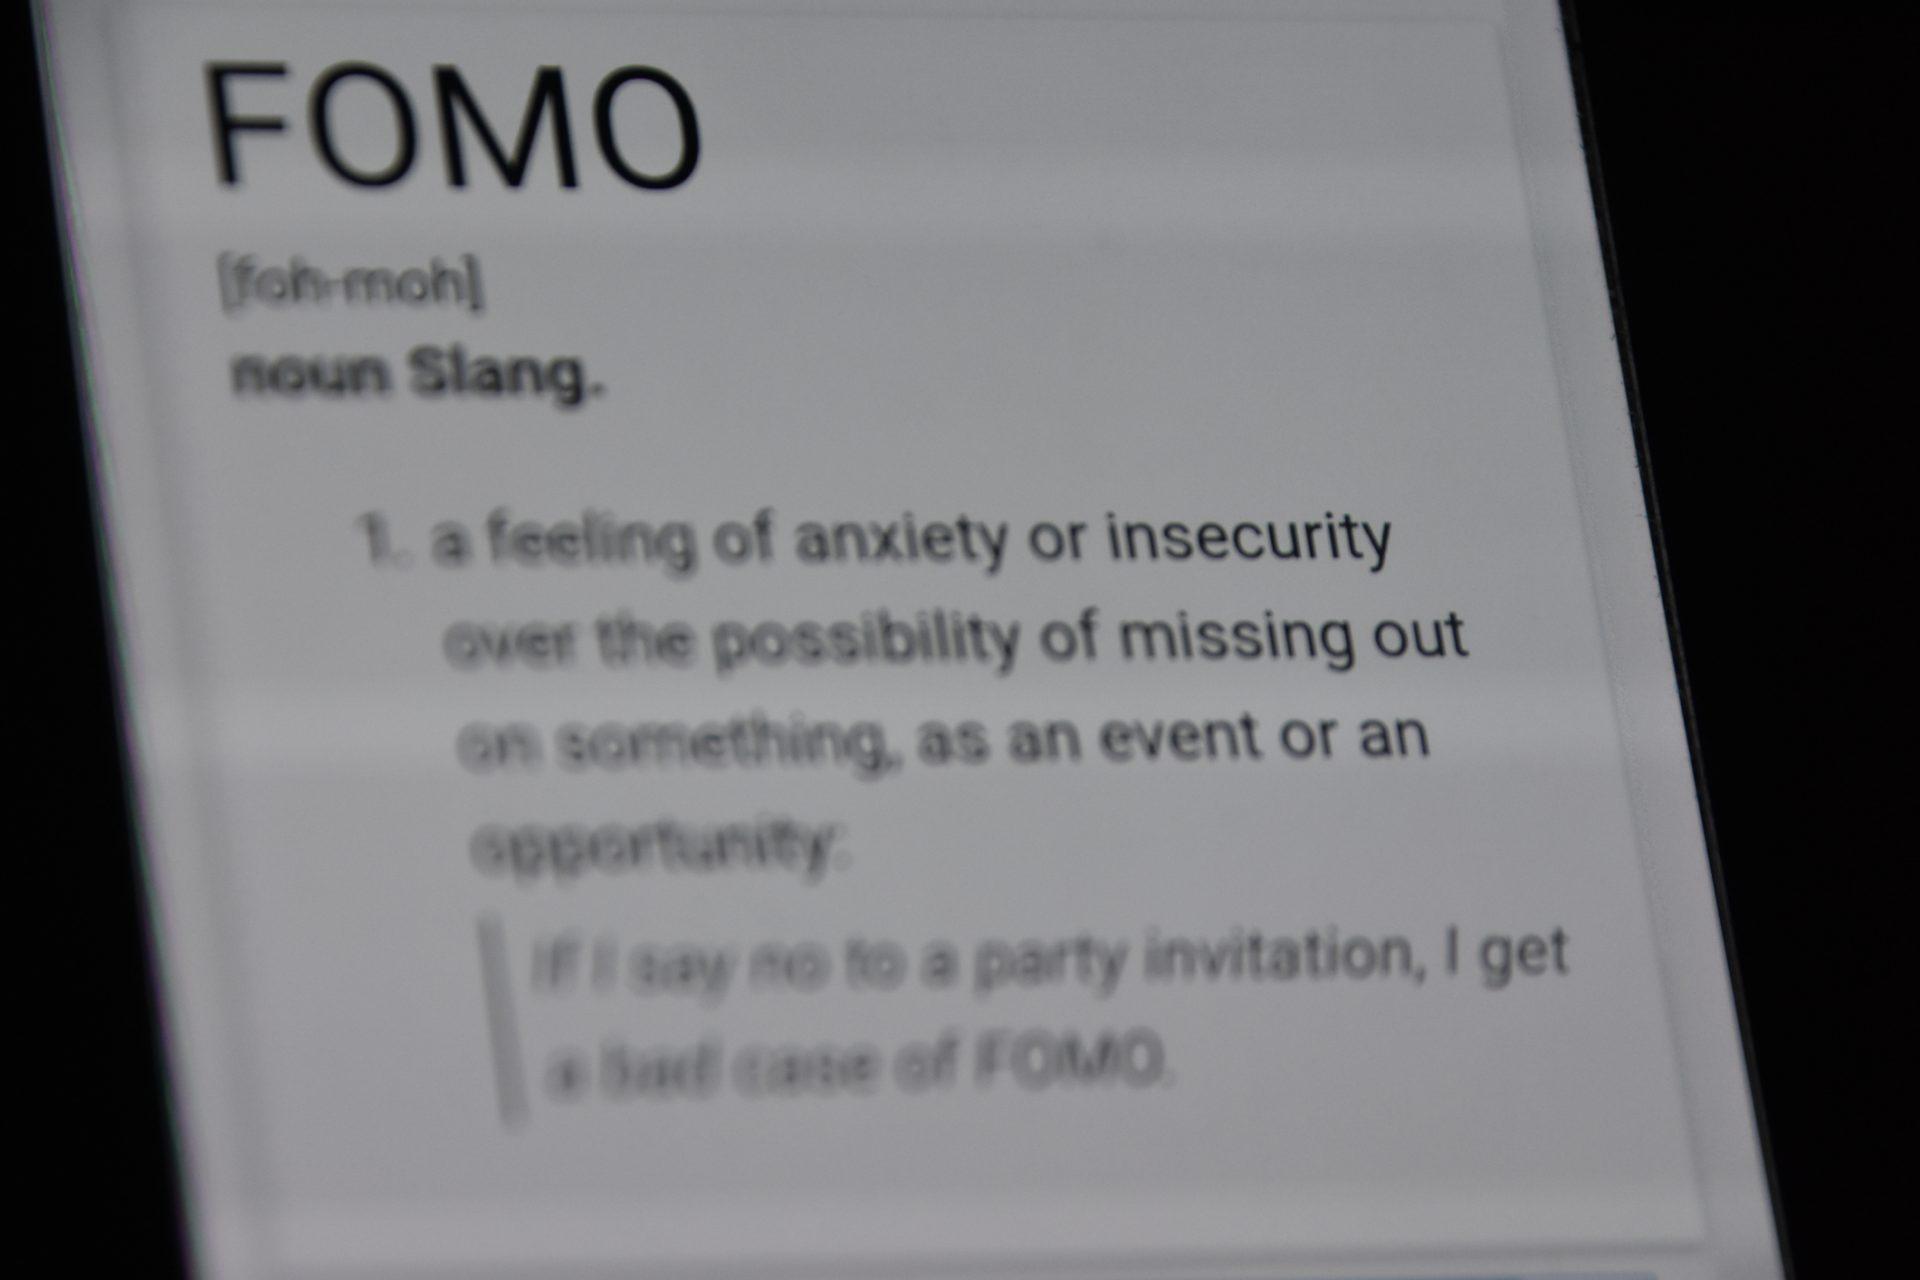 FOMO - Fear of Missing Out.